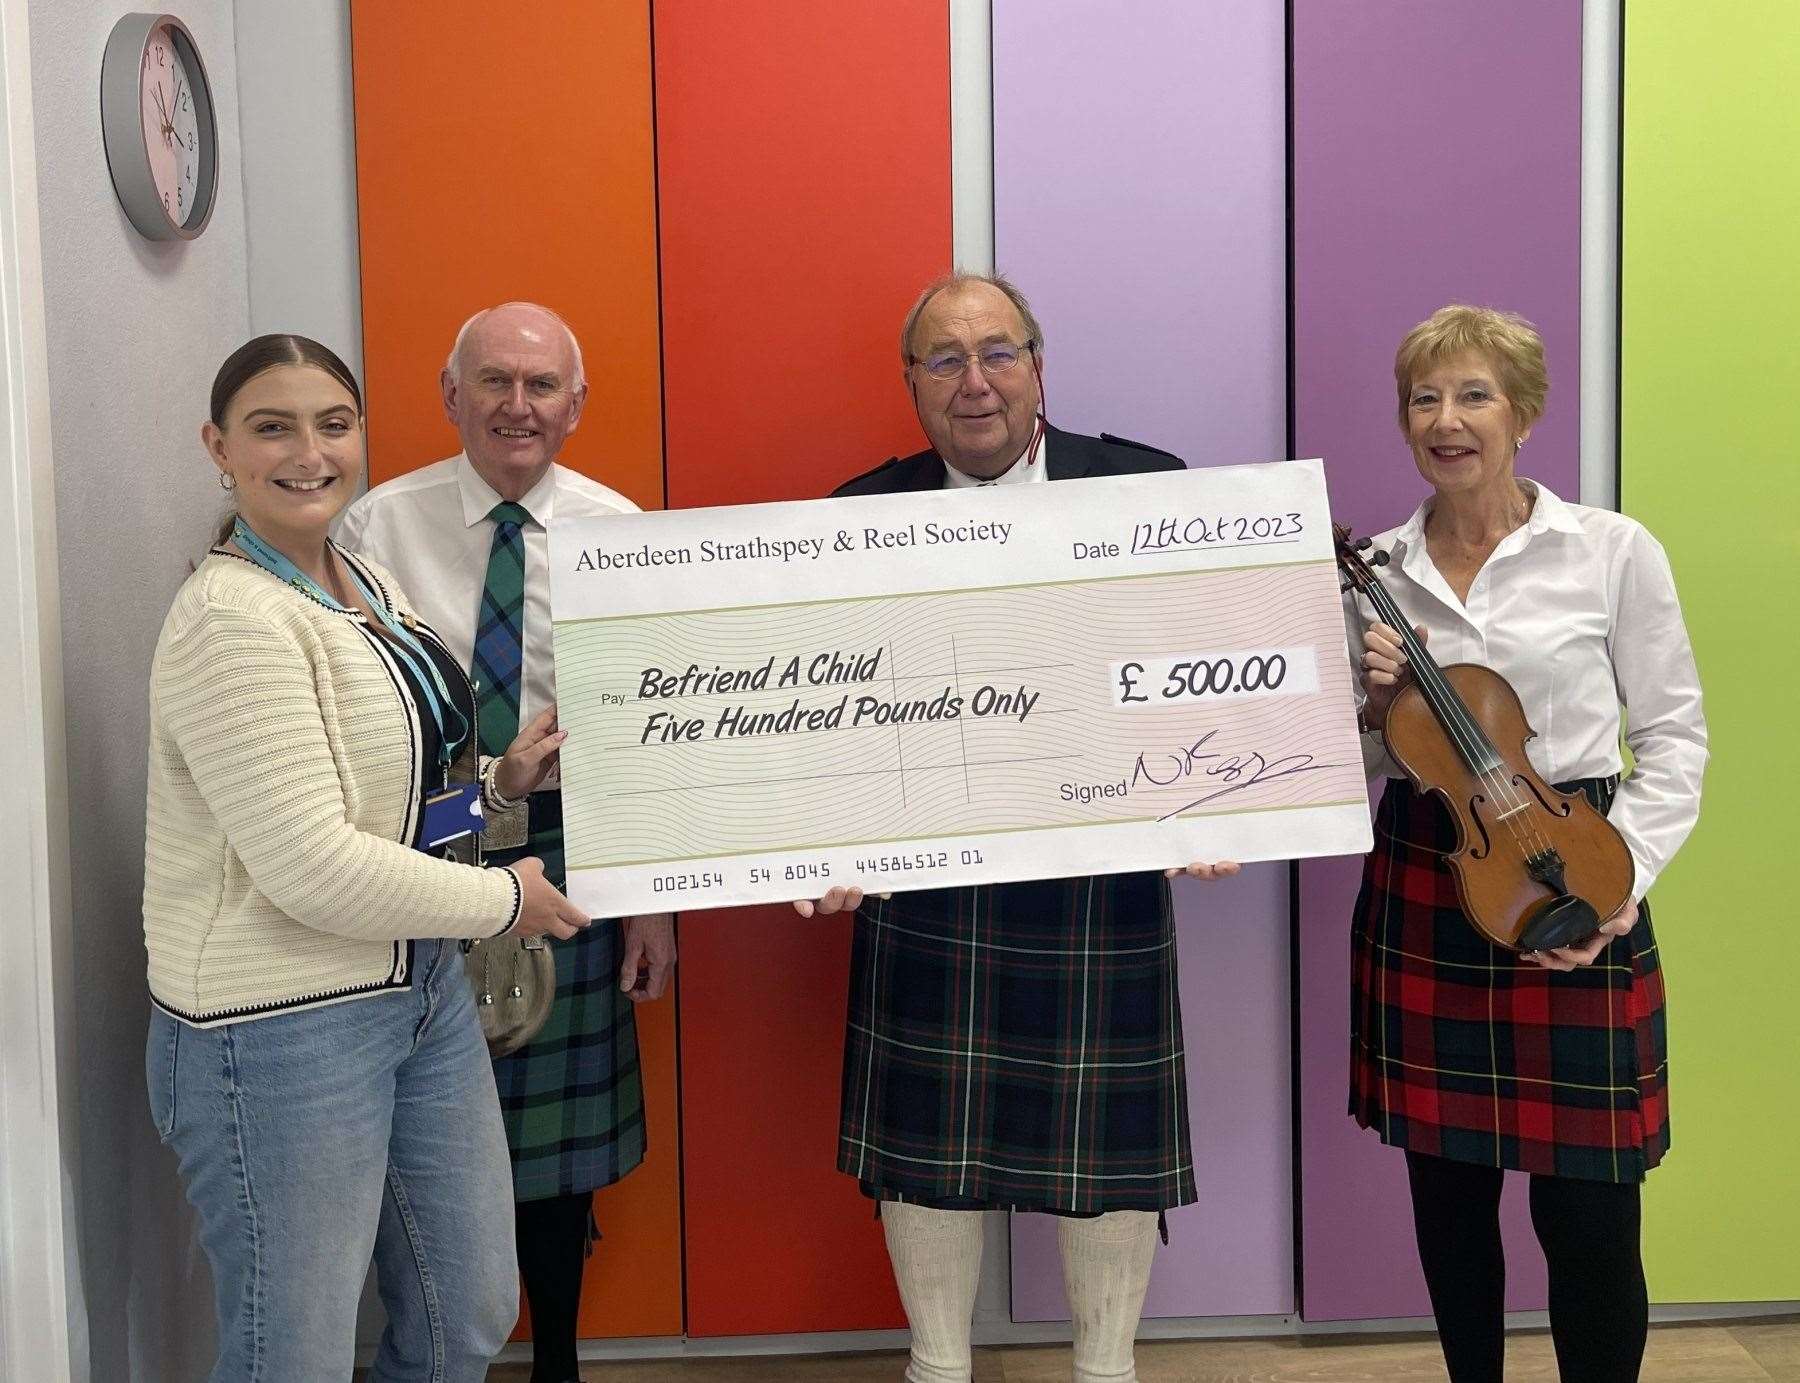 Befriend a Child’s Emily Findlay receives the fundraising cheque from Aberdeen Strathspey and Reel Society's Tom Cumming, Robin Ferguson and Fiona Dunbar.